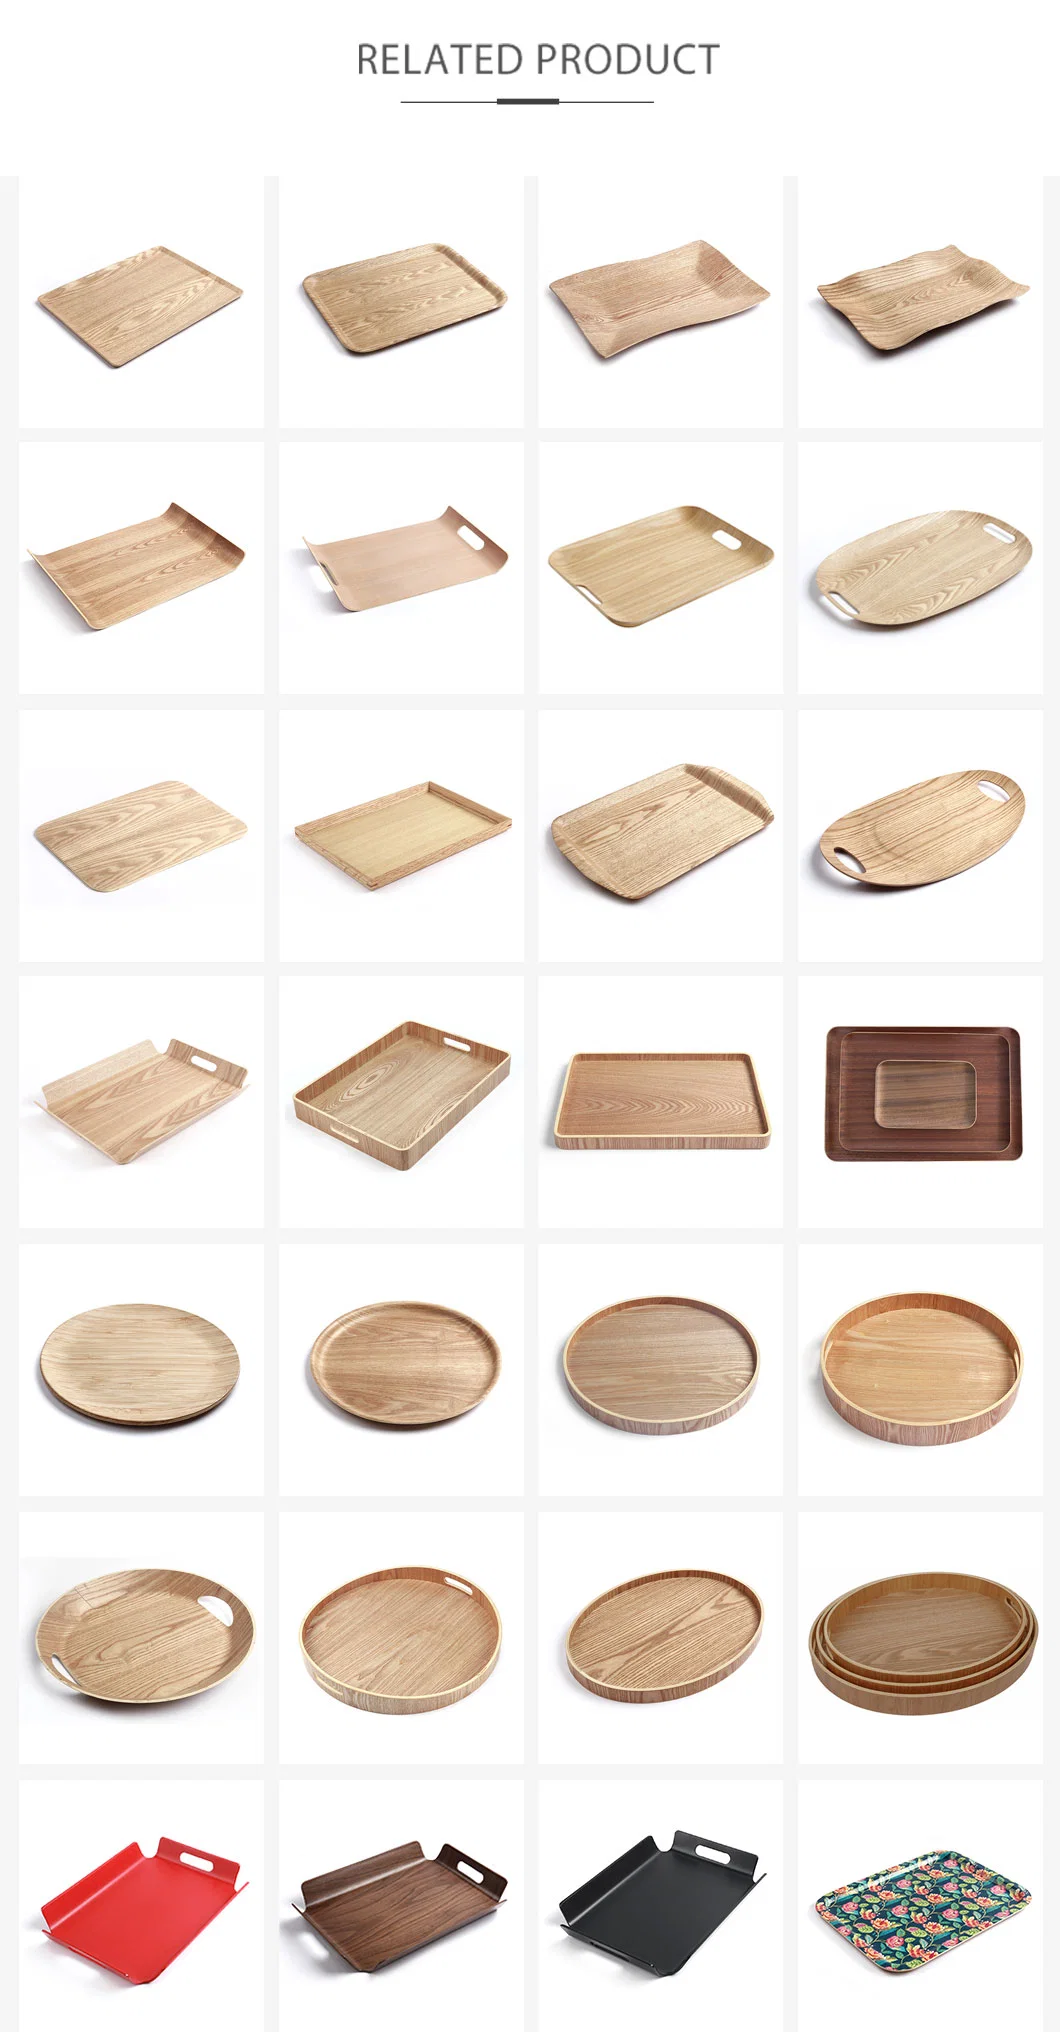 Oval Wooden Dinnerware Tabletop Cup Non-Disposable Hotel Set Gift Holder Serving Tray of 3PCS